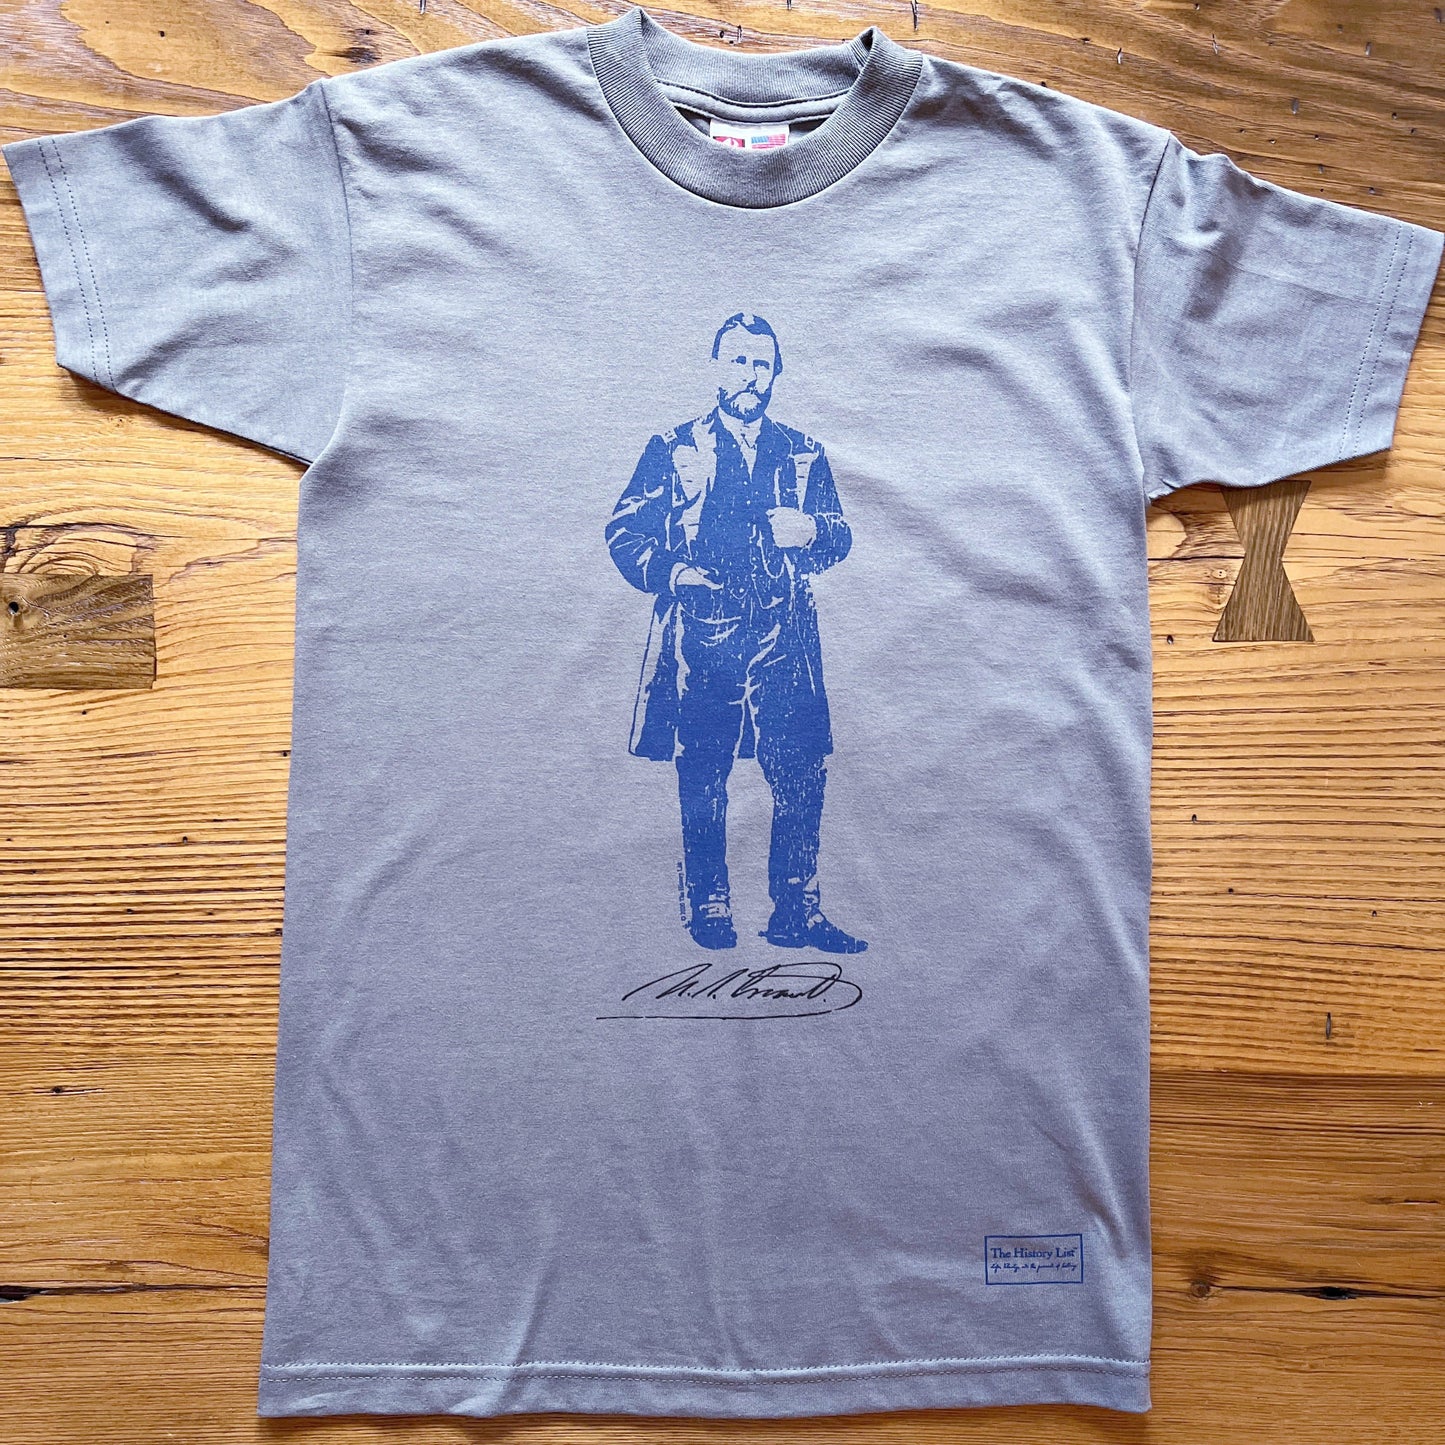  Grey Ulysses S. Grant "Signature Series" Shirt  from the History List Store — Made in the USA